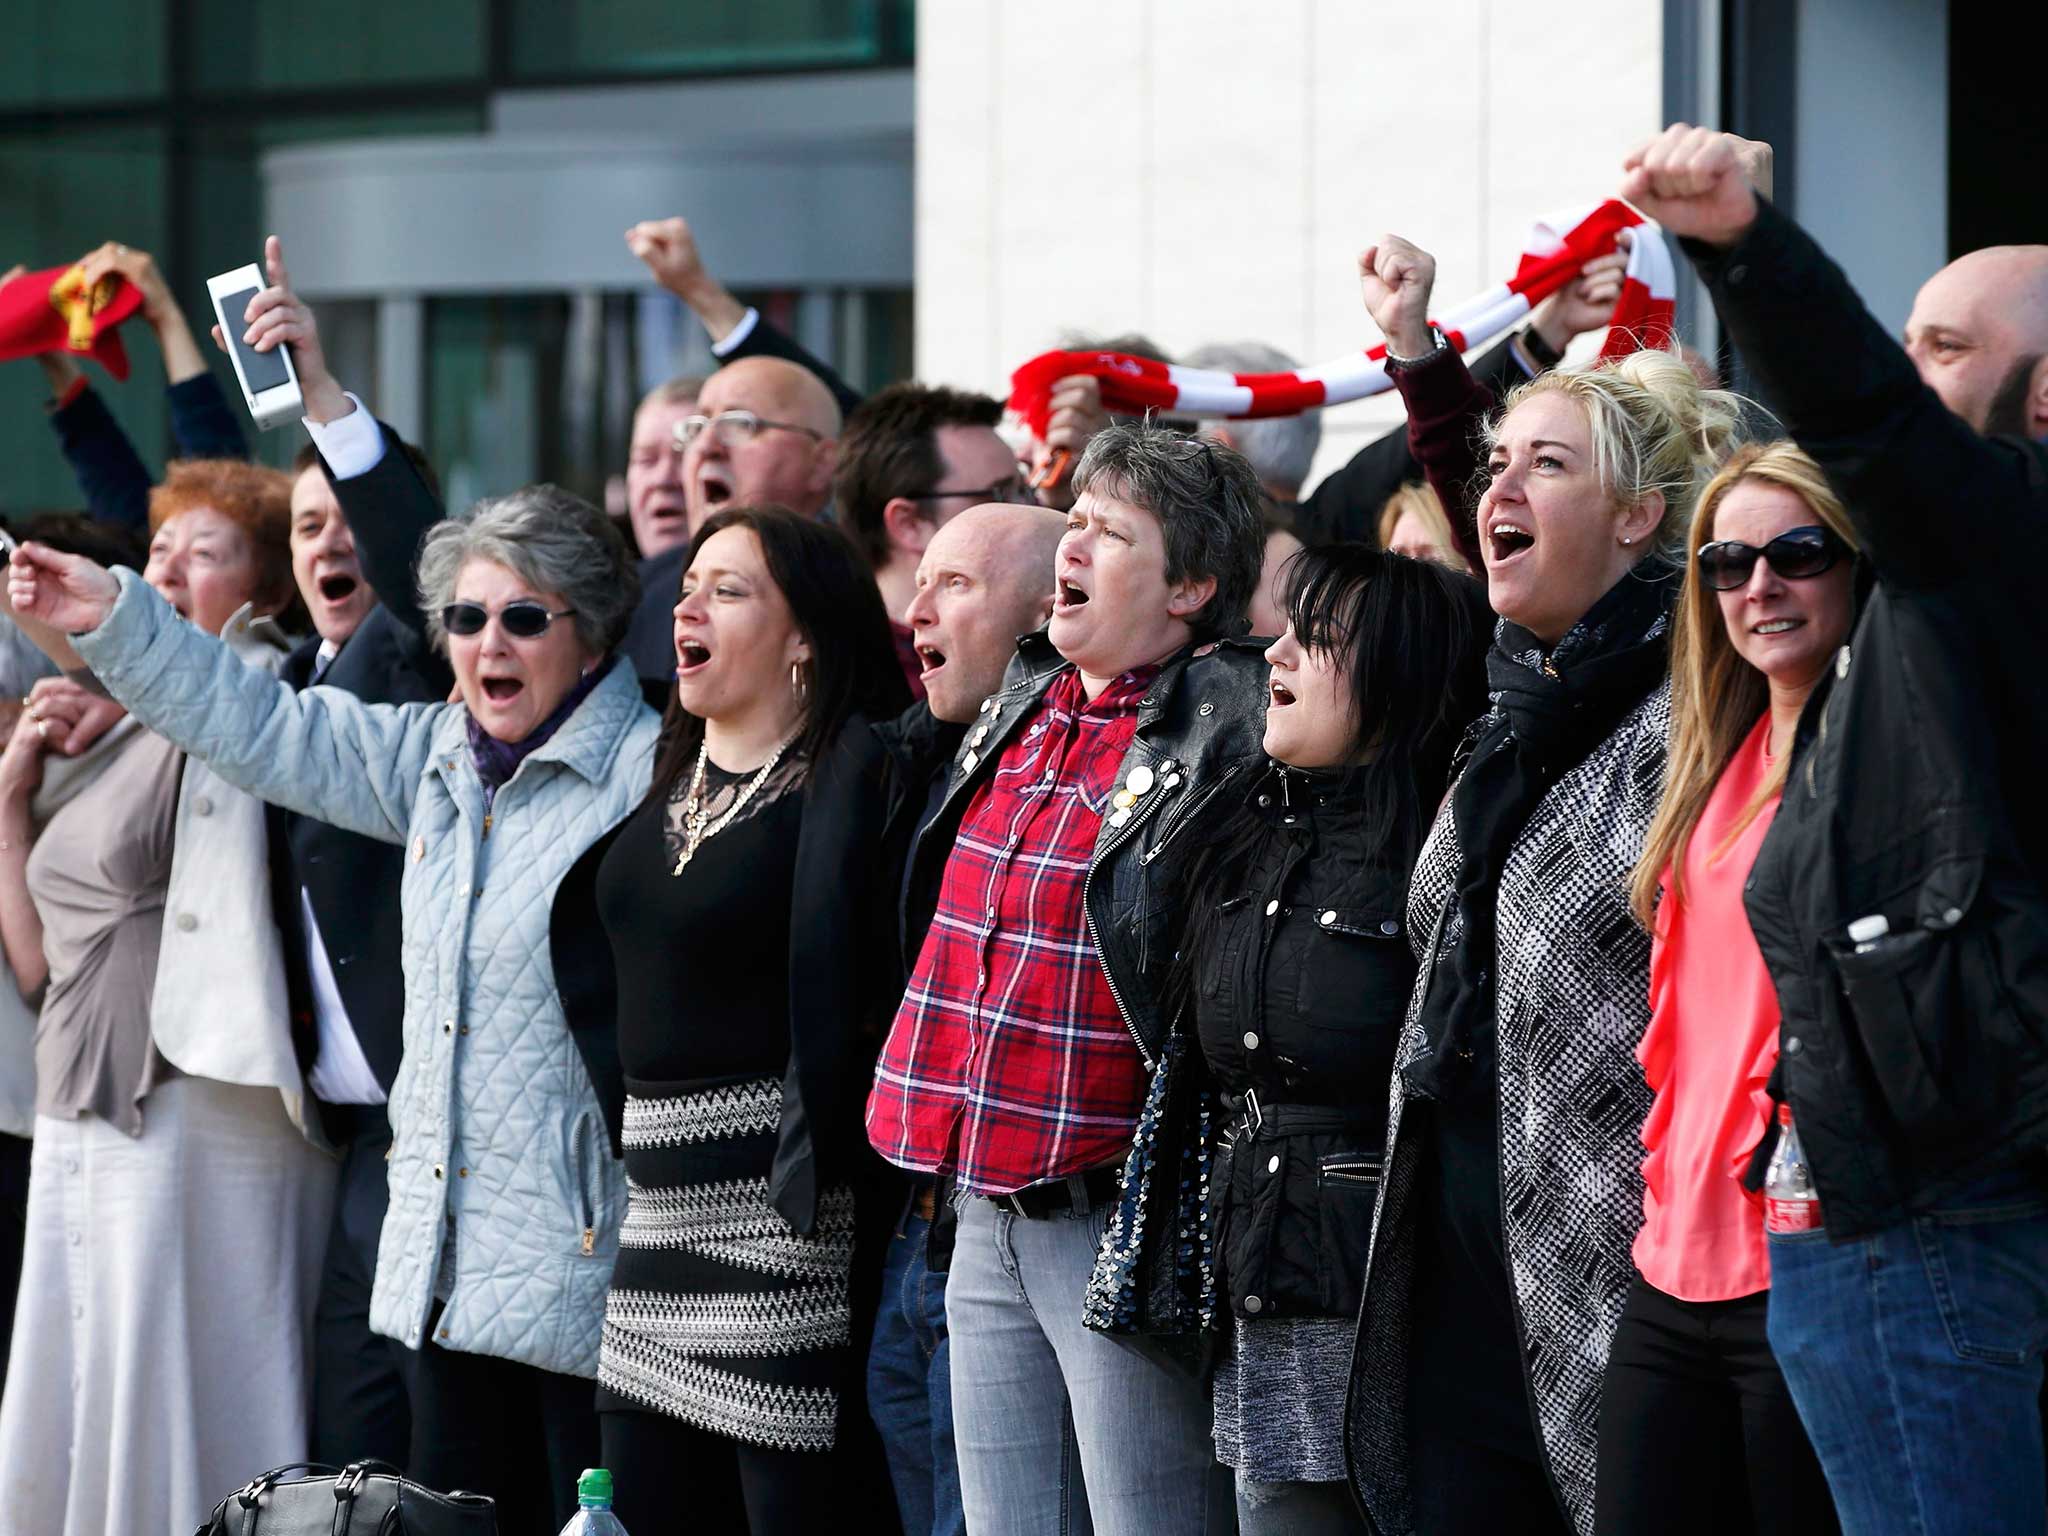 Relatives sing "You'll never walk alone" after the jury delivered its verdict at the new inquests into the Hillsborough disaster